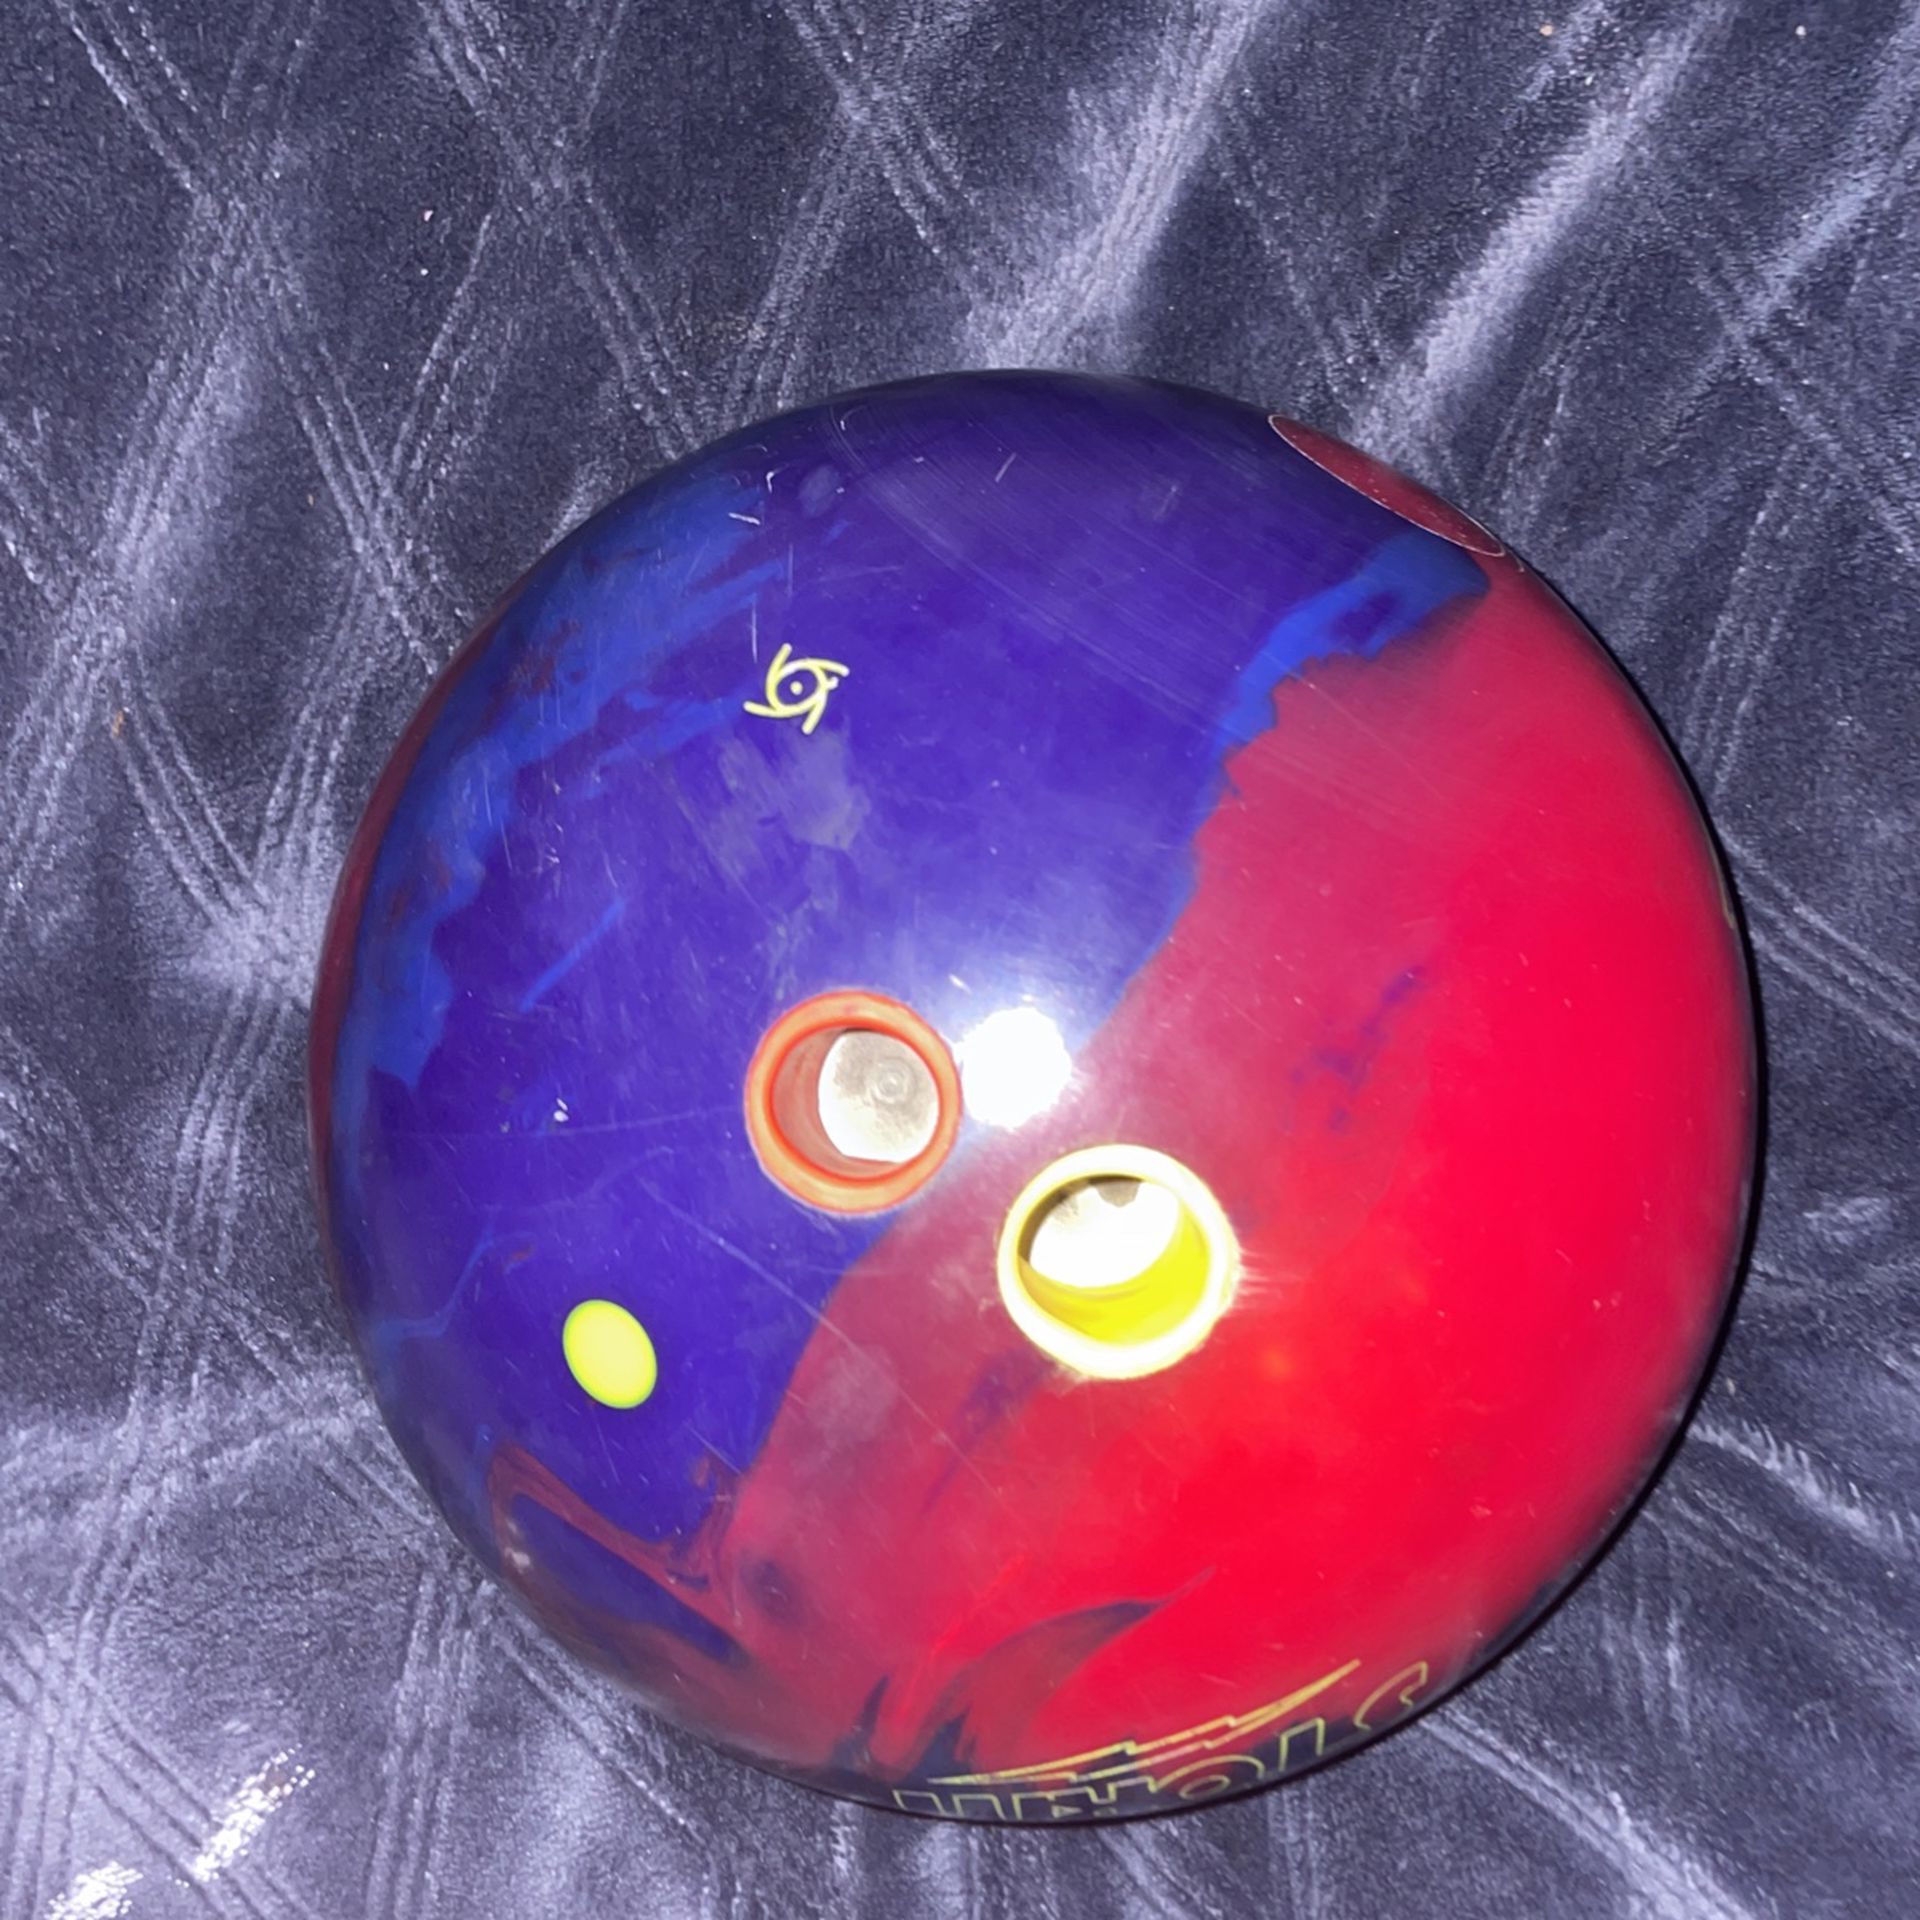 Storm 3 Ball Bowling Bag for Sale in Oxnard, CA - OfferUp